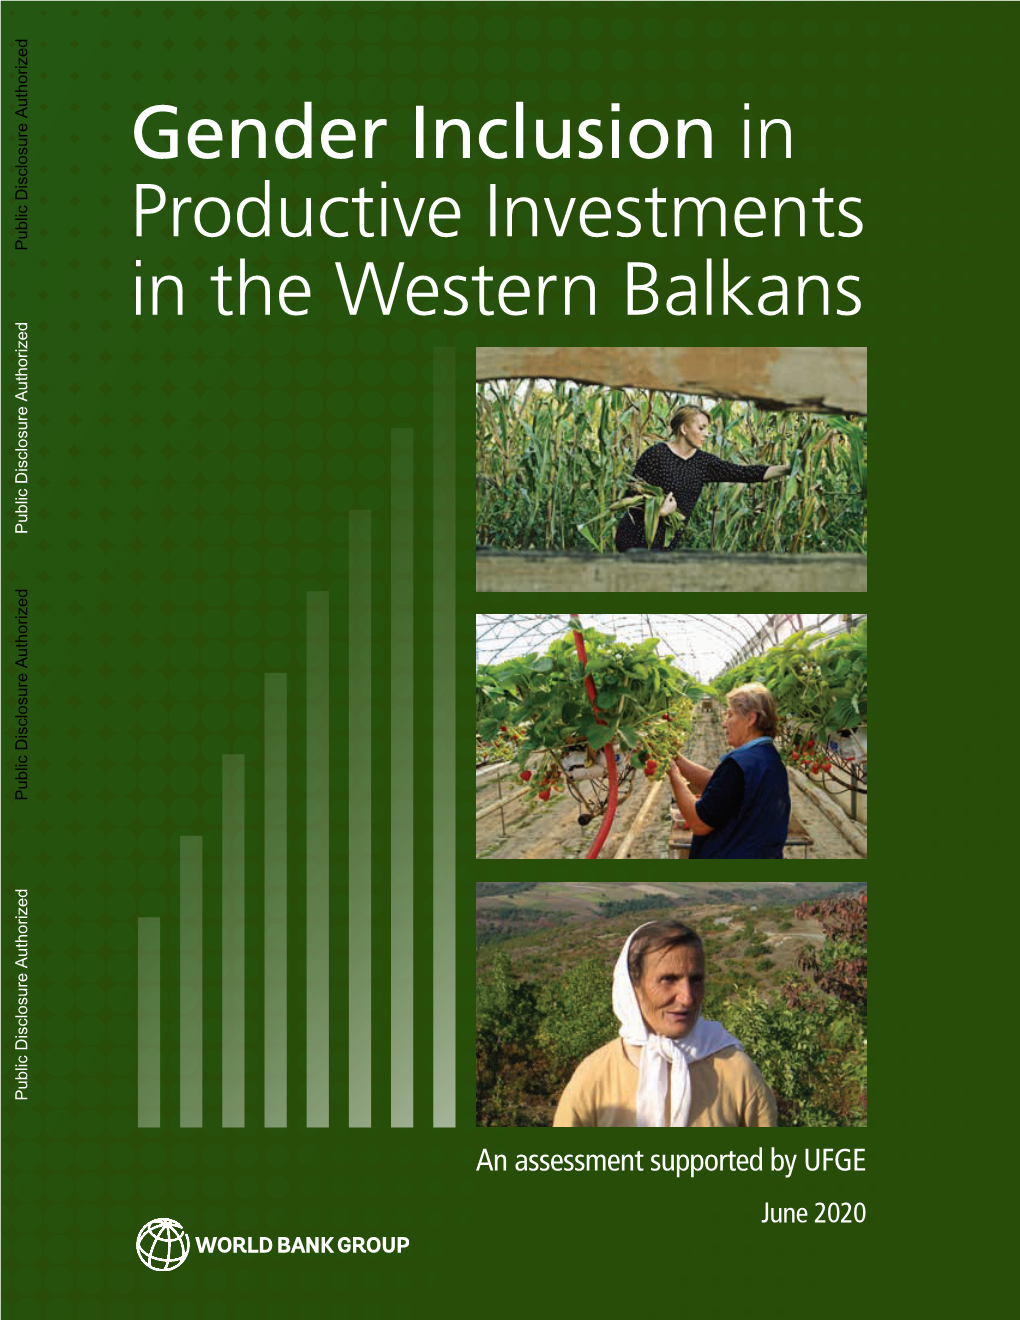 Gender Inclusion in Productive Investments in the Western Balkans